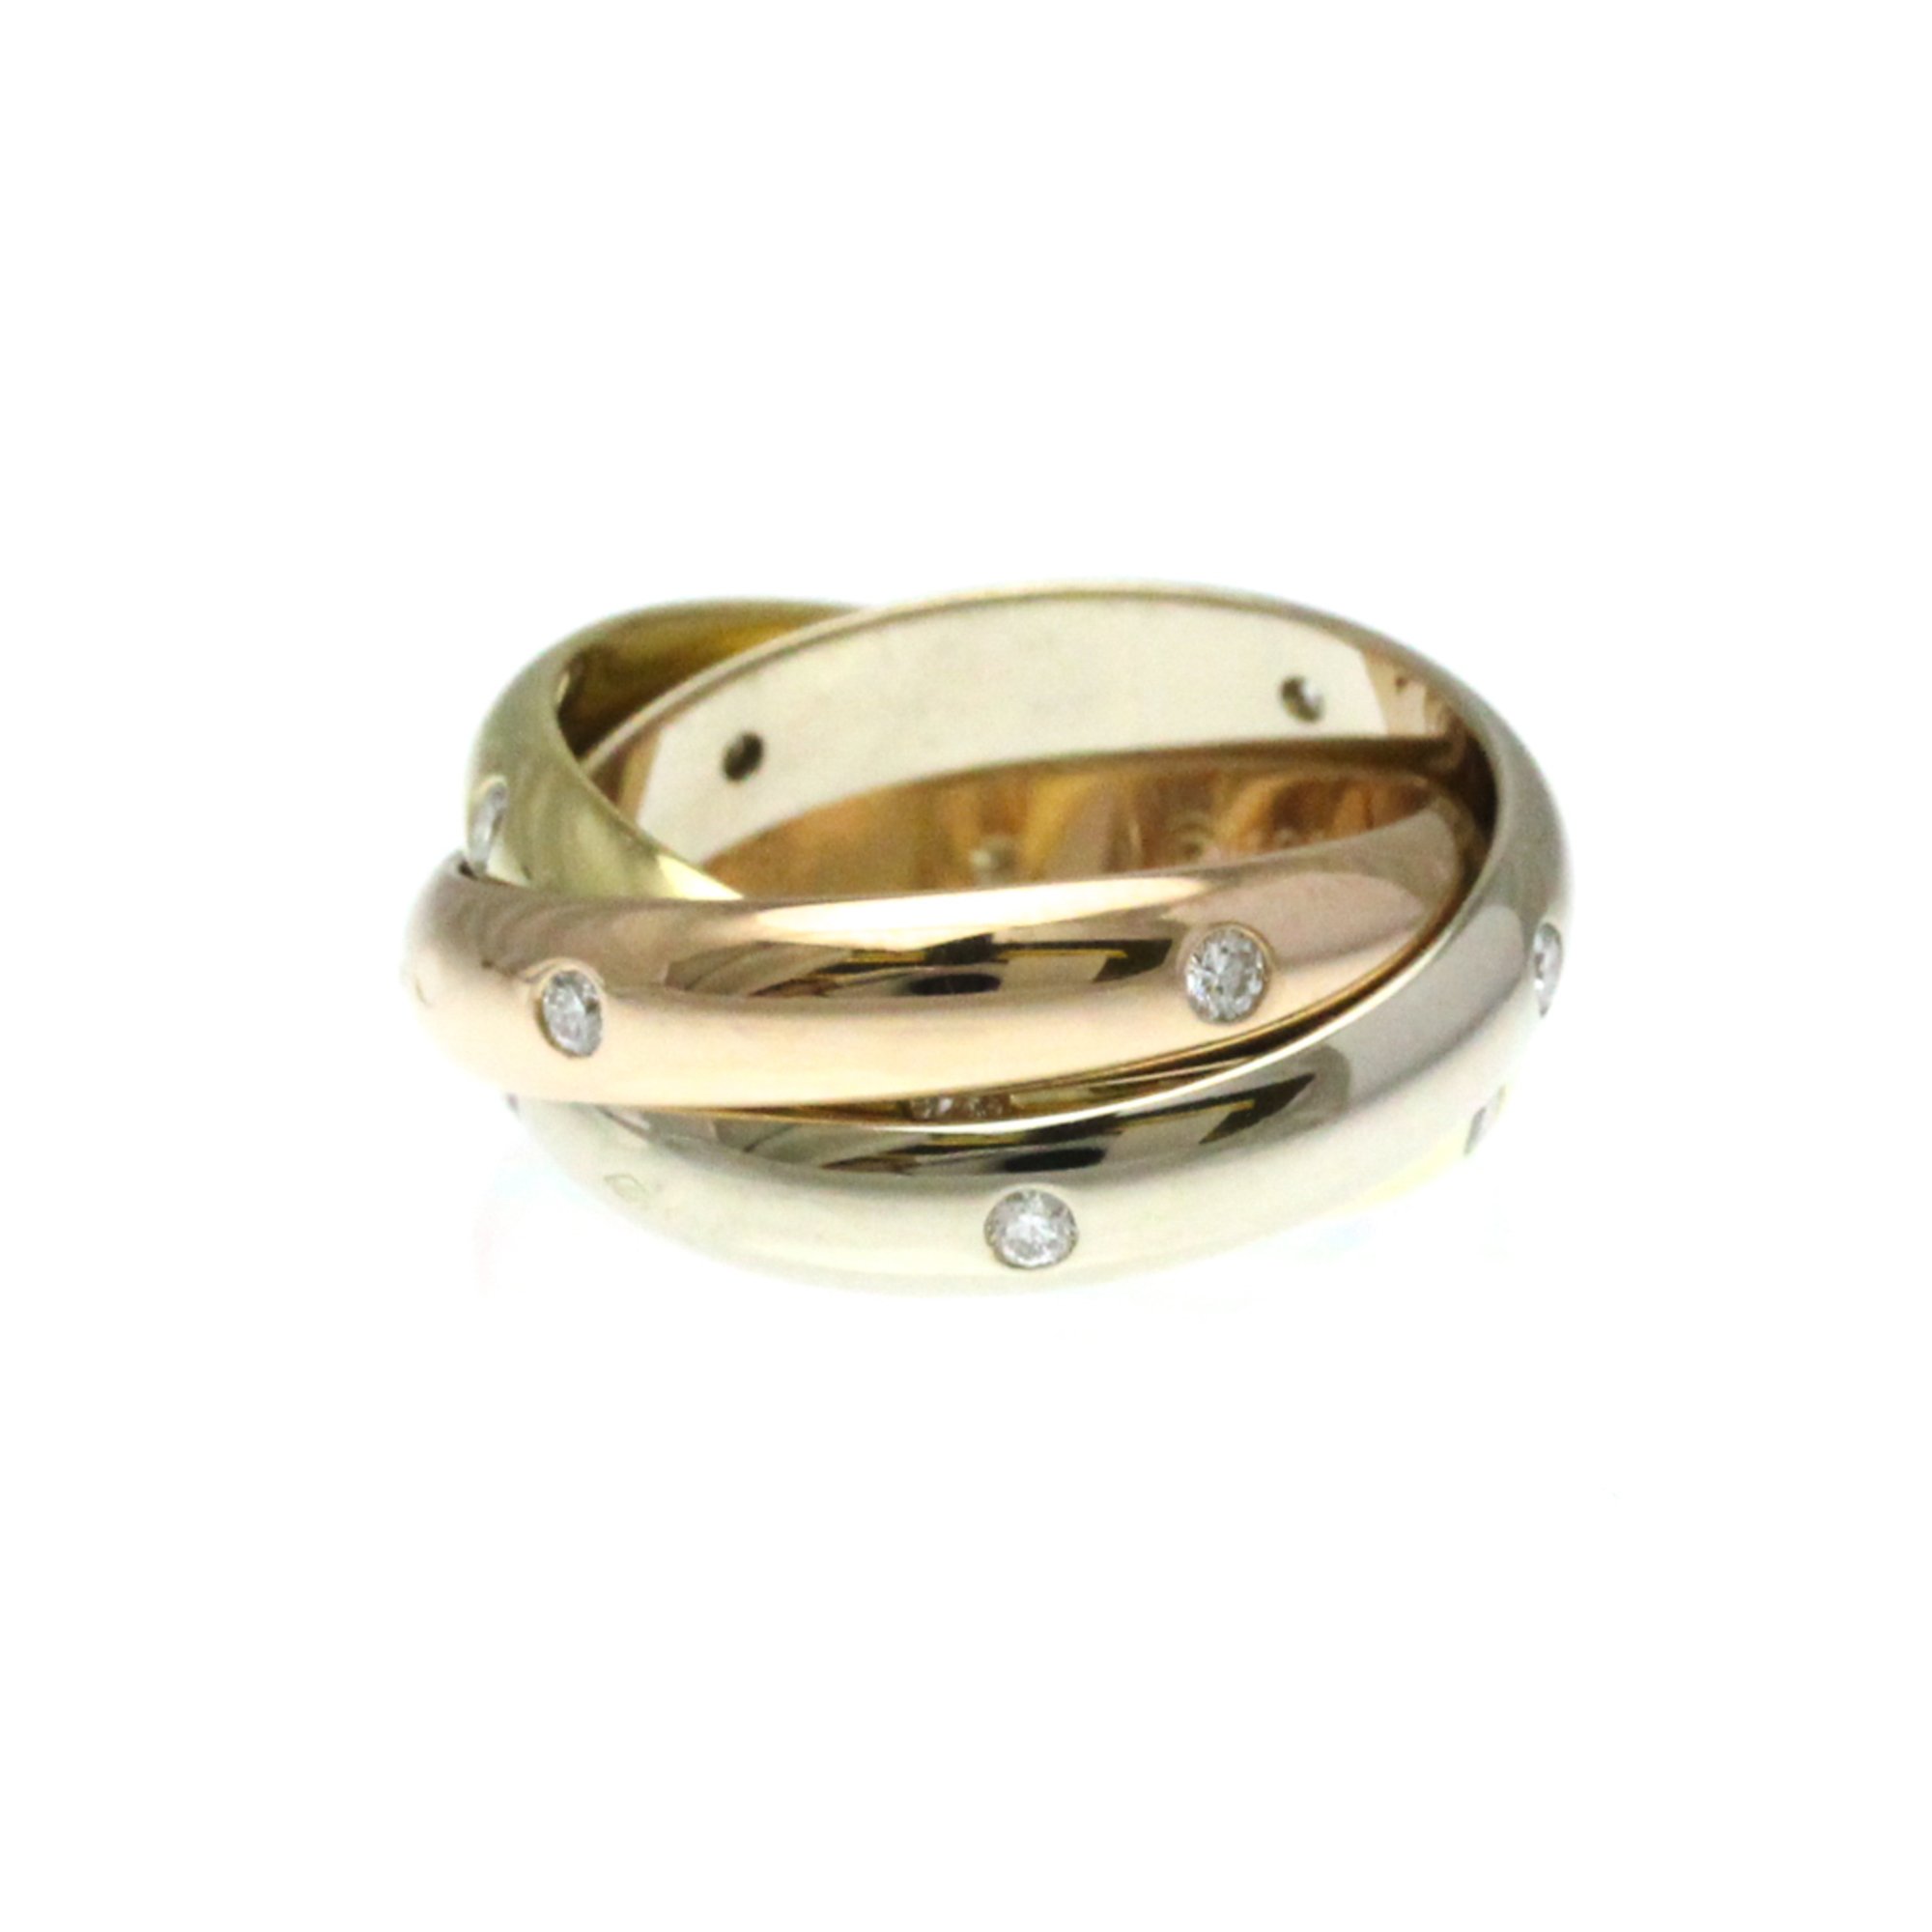 Cartier Trinity Ring 15PD Pink Gold (18K),White Gold (18K),Yellow Gold (18K) Fashion Diamond Band Ring Gold